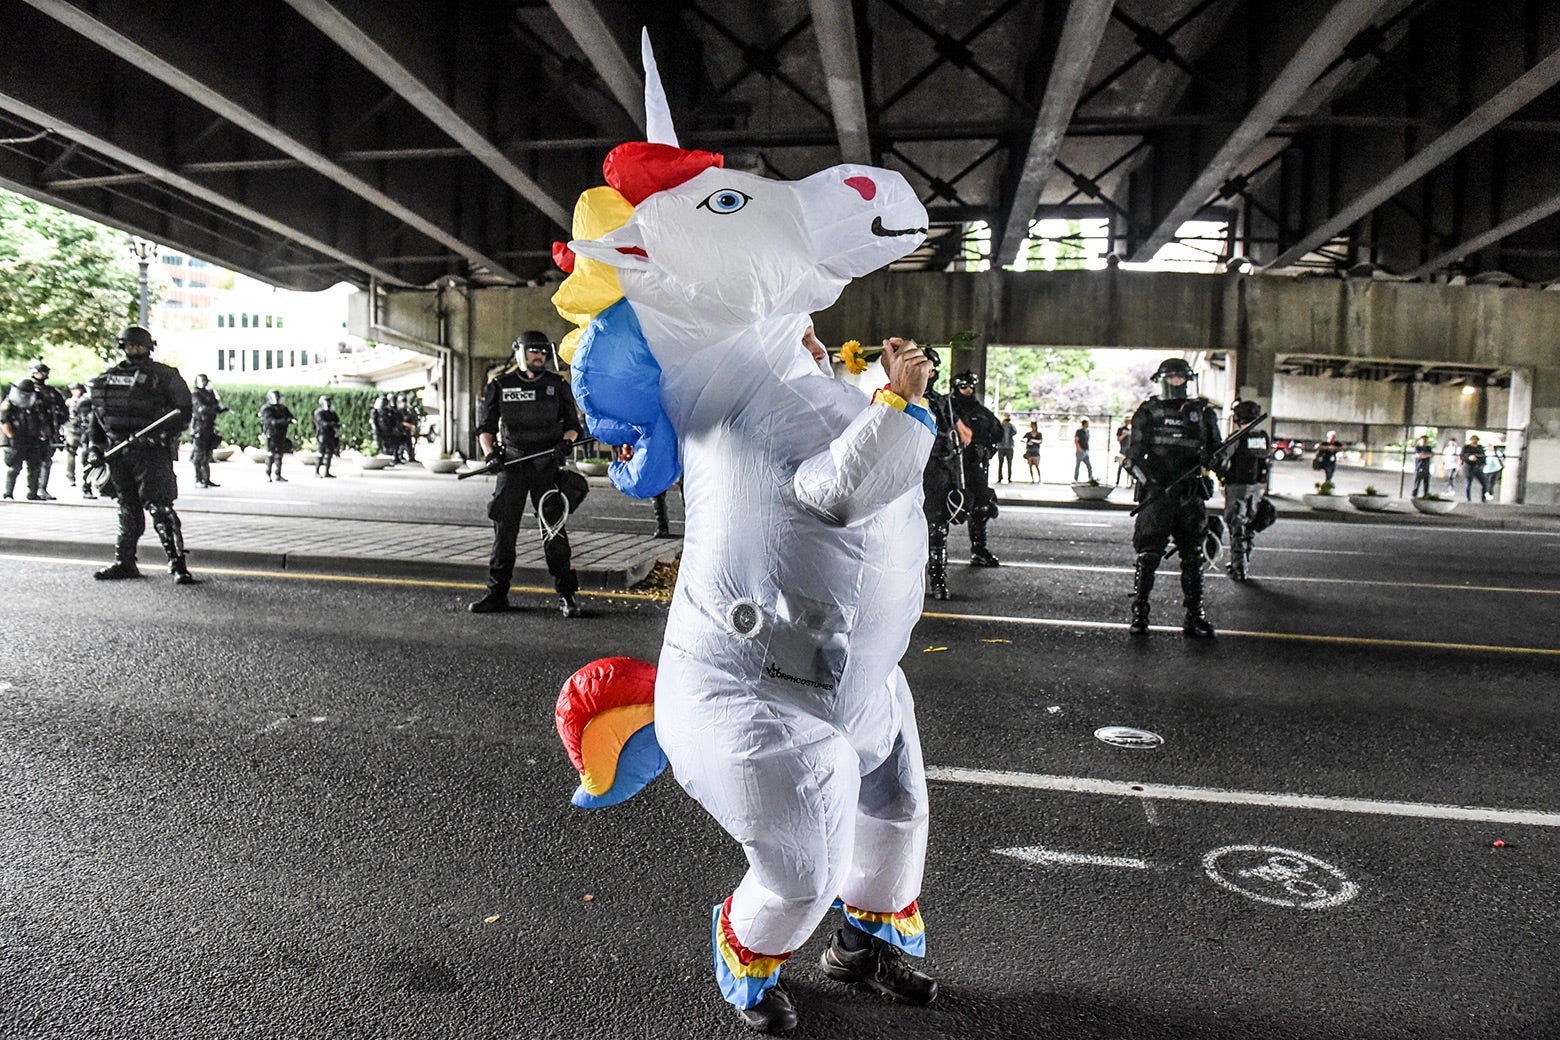 A person in an inflatable unicorn costume stands in a street under an overpass with police in riot gear in the background.